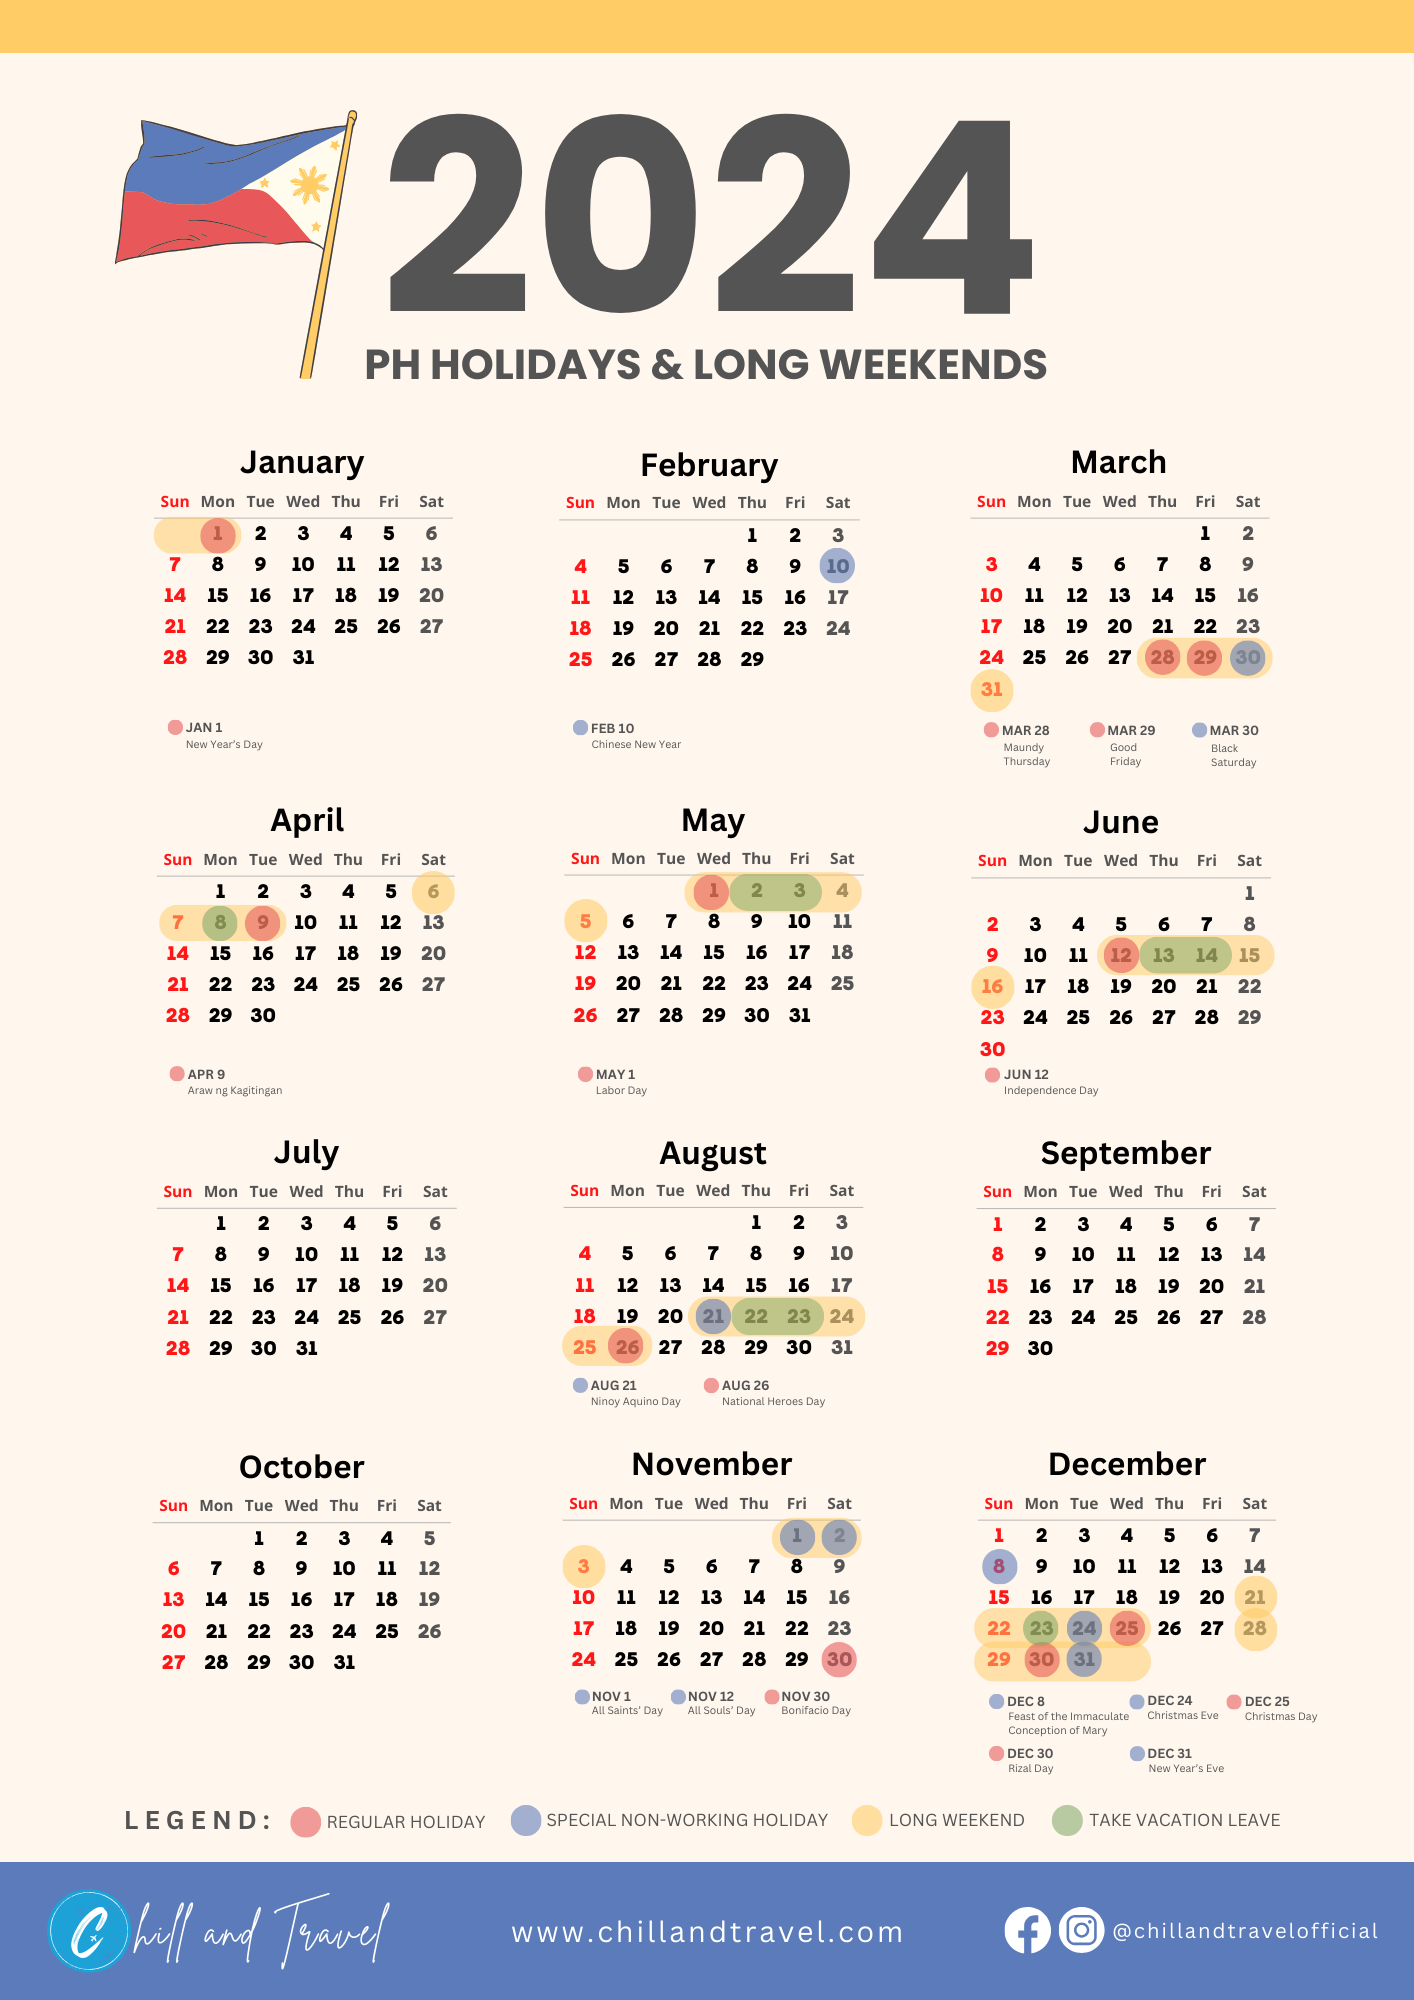 2024 Philippine Holidays & Long Weekends to Plan Your Travels